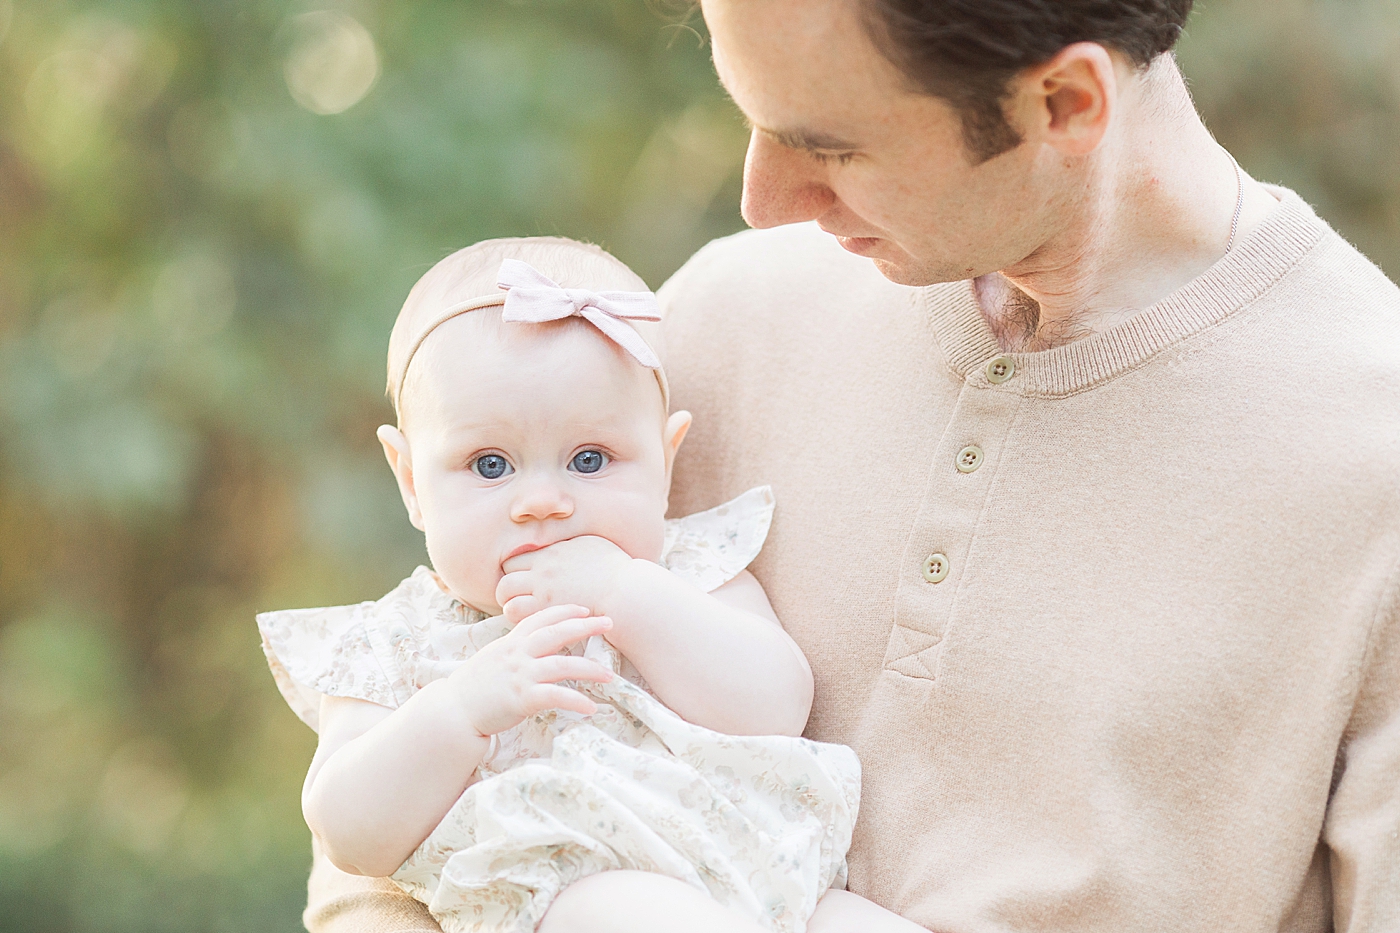 Baby girl with beautiful blue eyes being held by her Daddy. Photos by Fresh Light Photography.